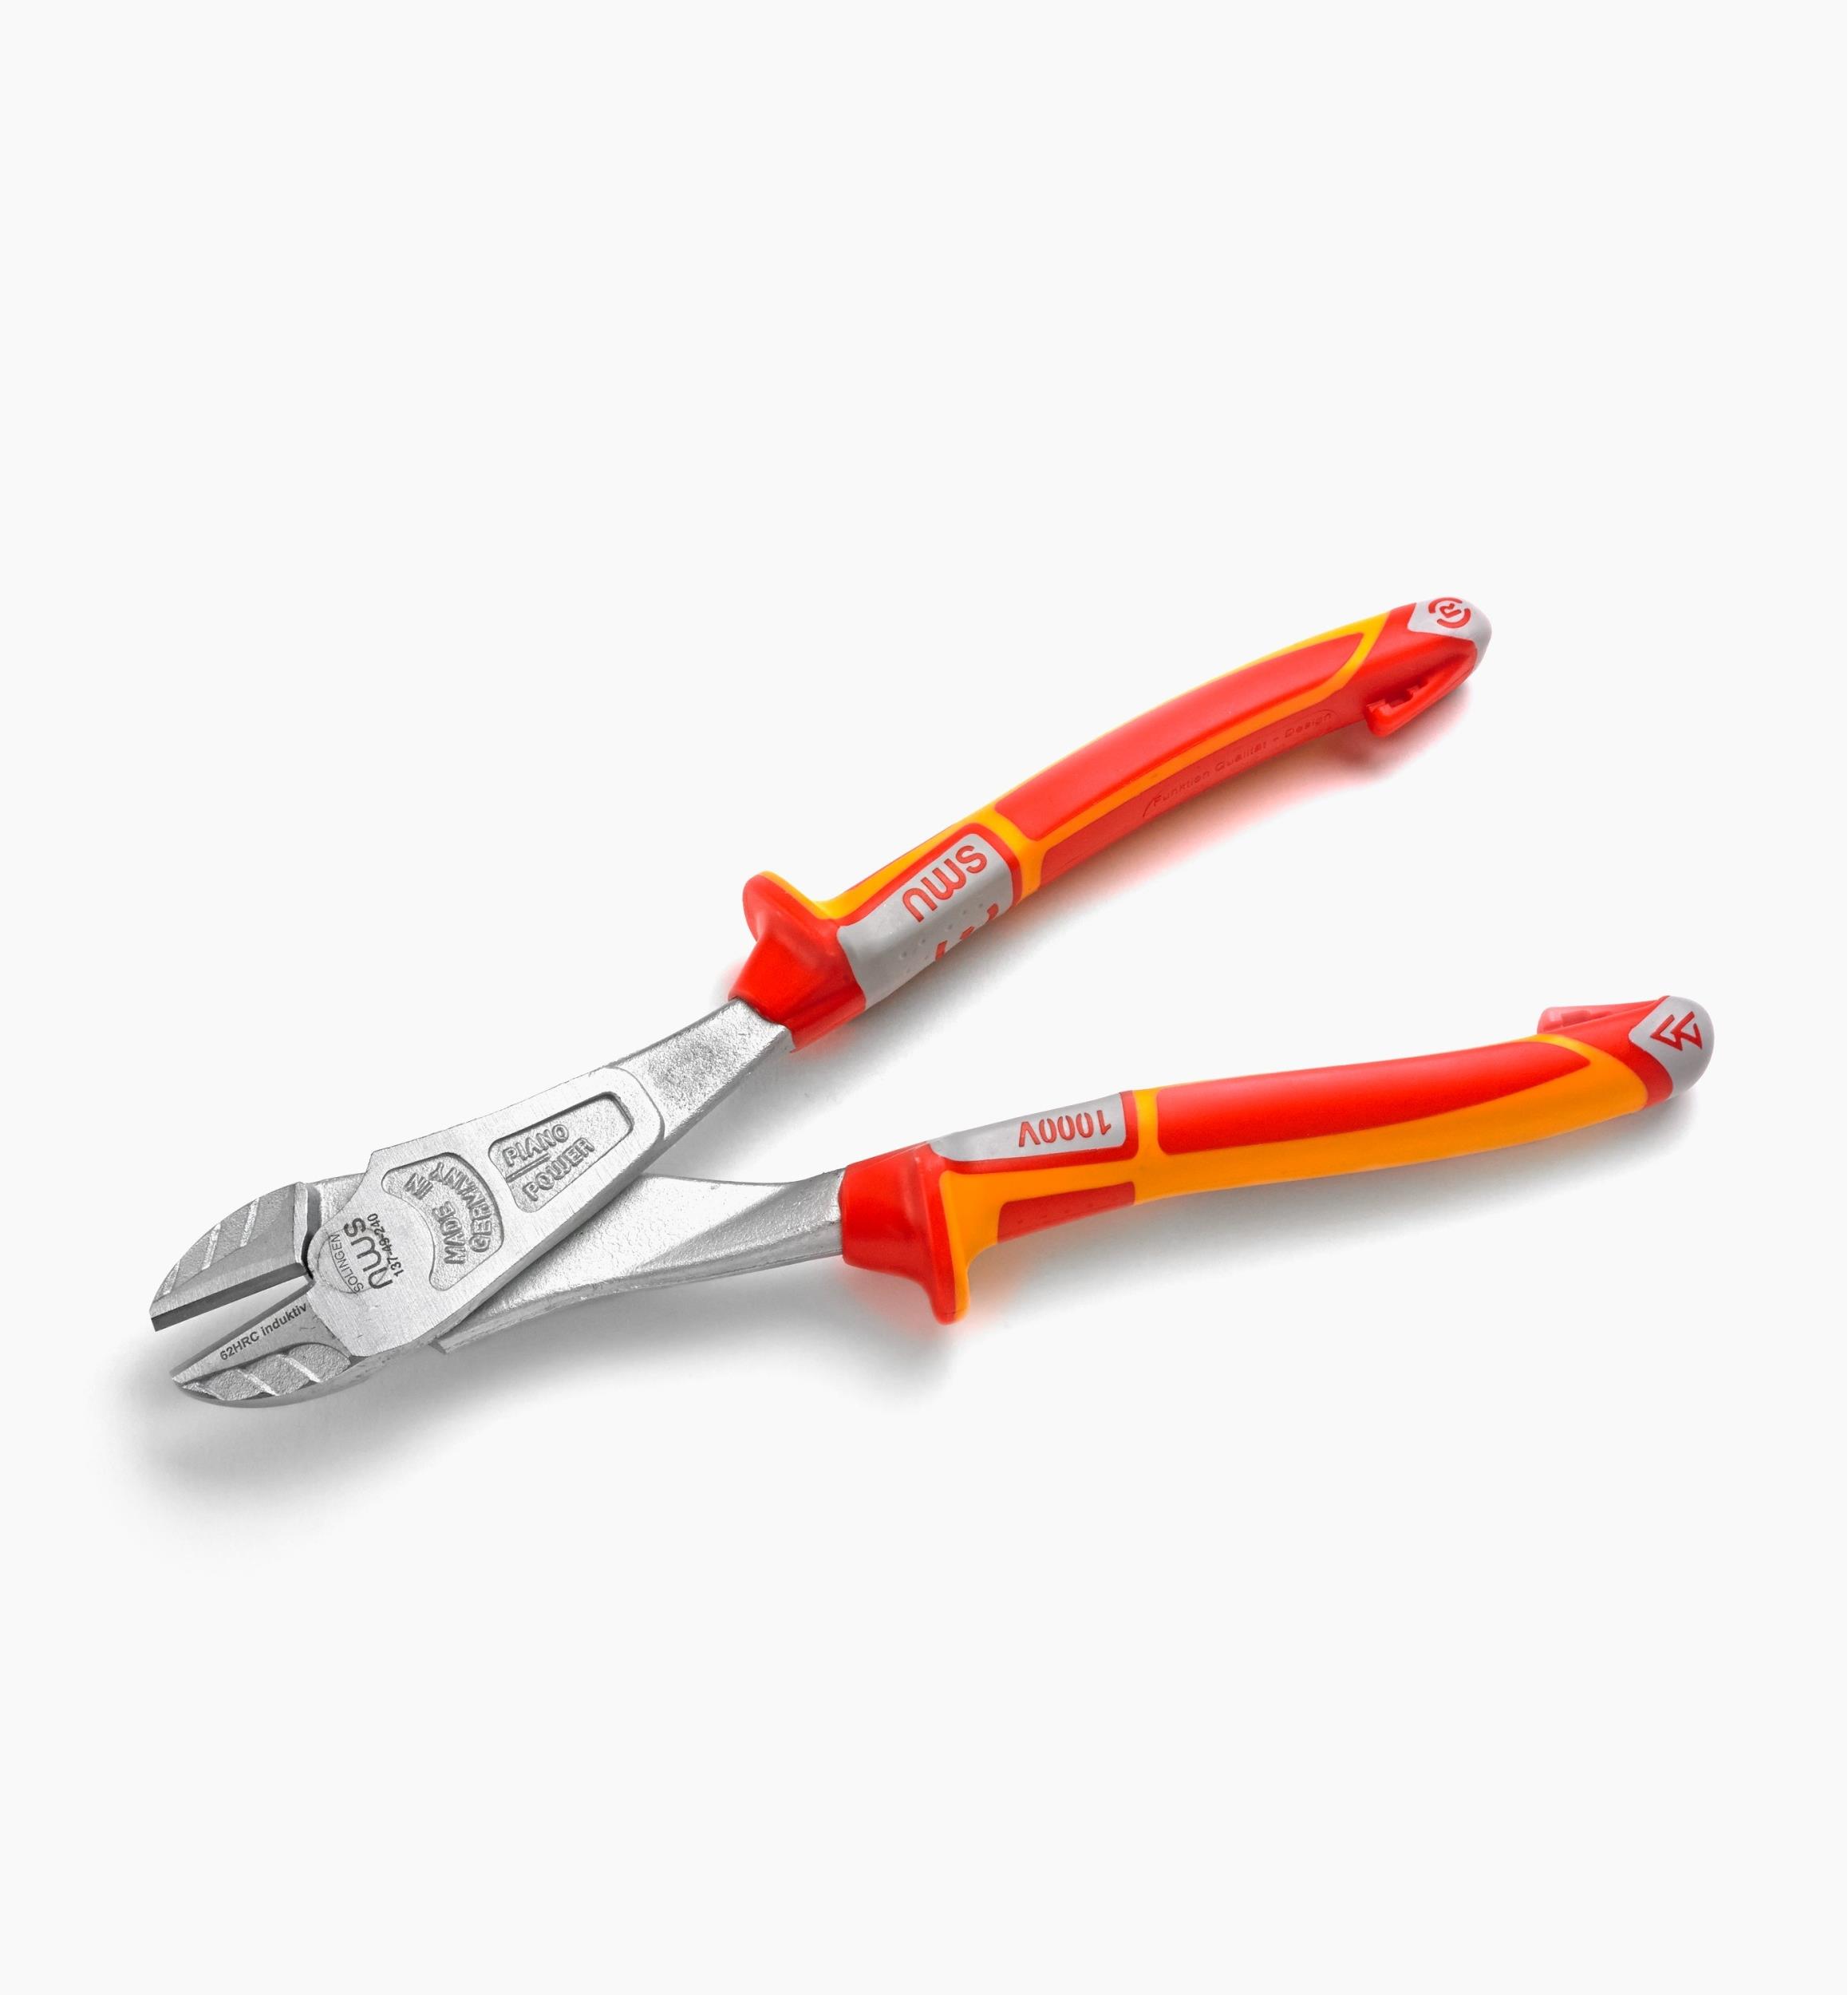 NWS Insulated (1000V) Regular & High-Leverage Side-Cutters - Lee Valley  Tools